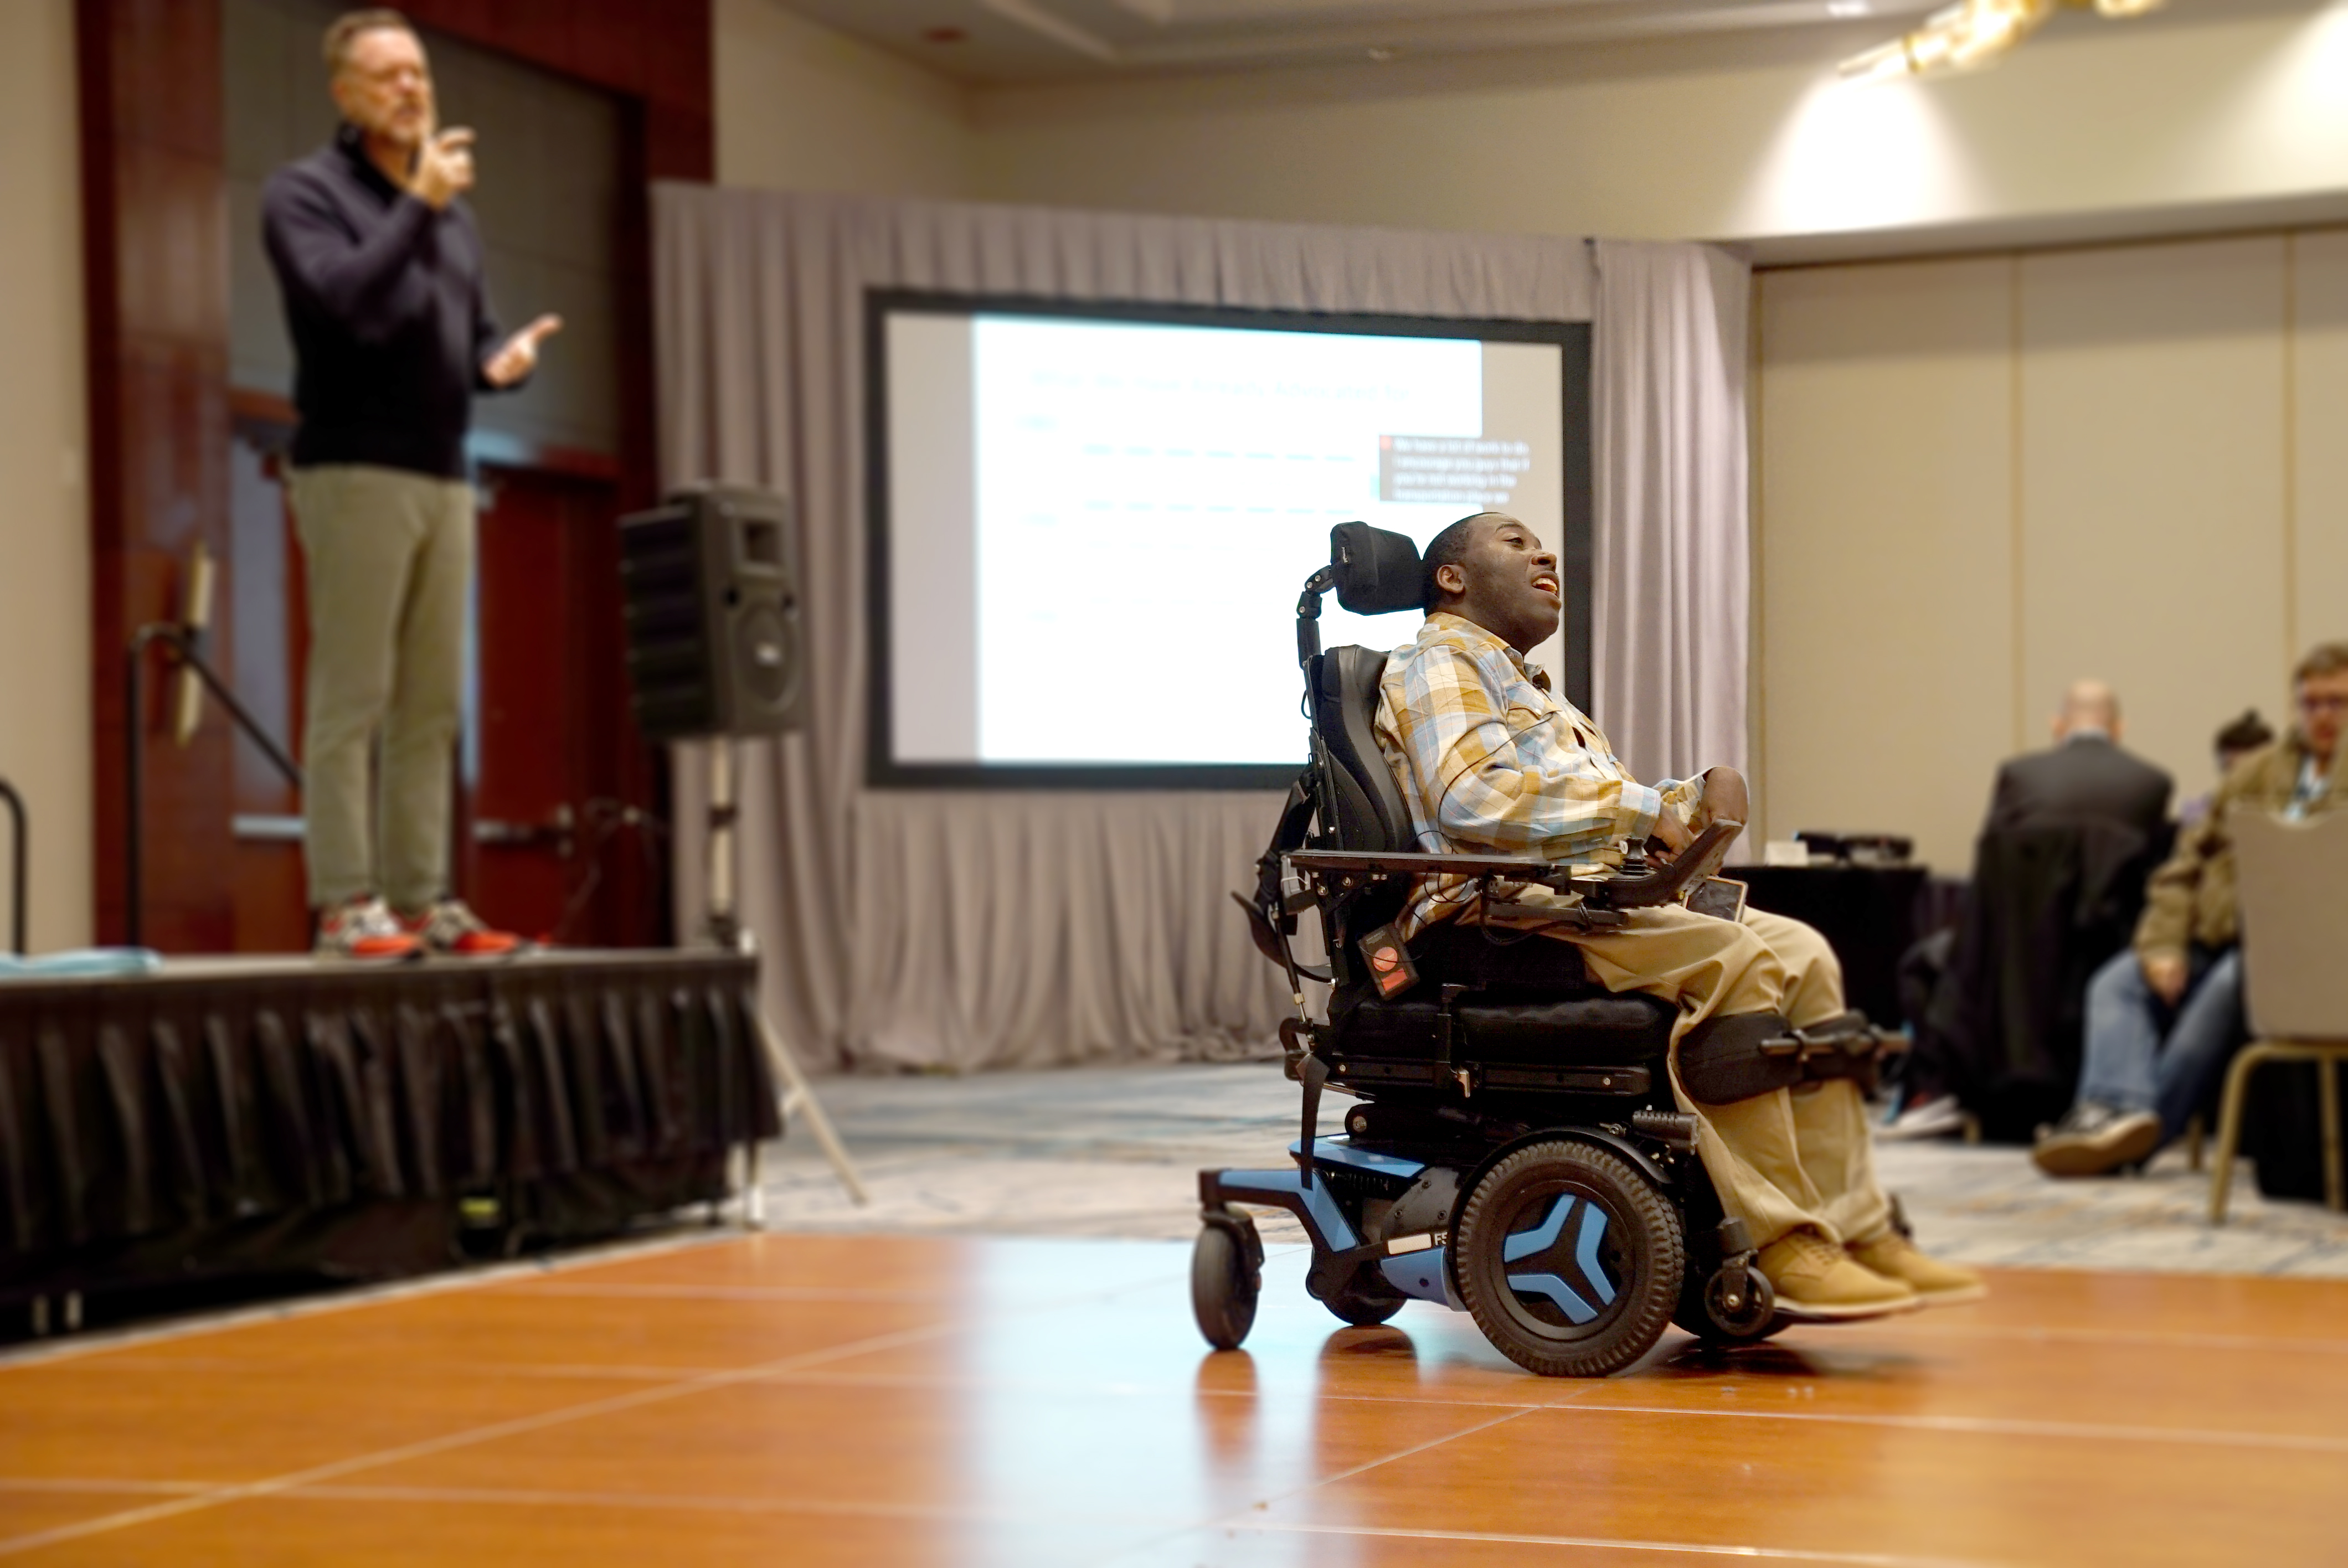 "A man with short black hair wearing a button up shirt and khaki pants while sitting in a motorized wheelchair speaks to an audience in a large conference room"